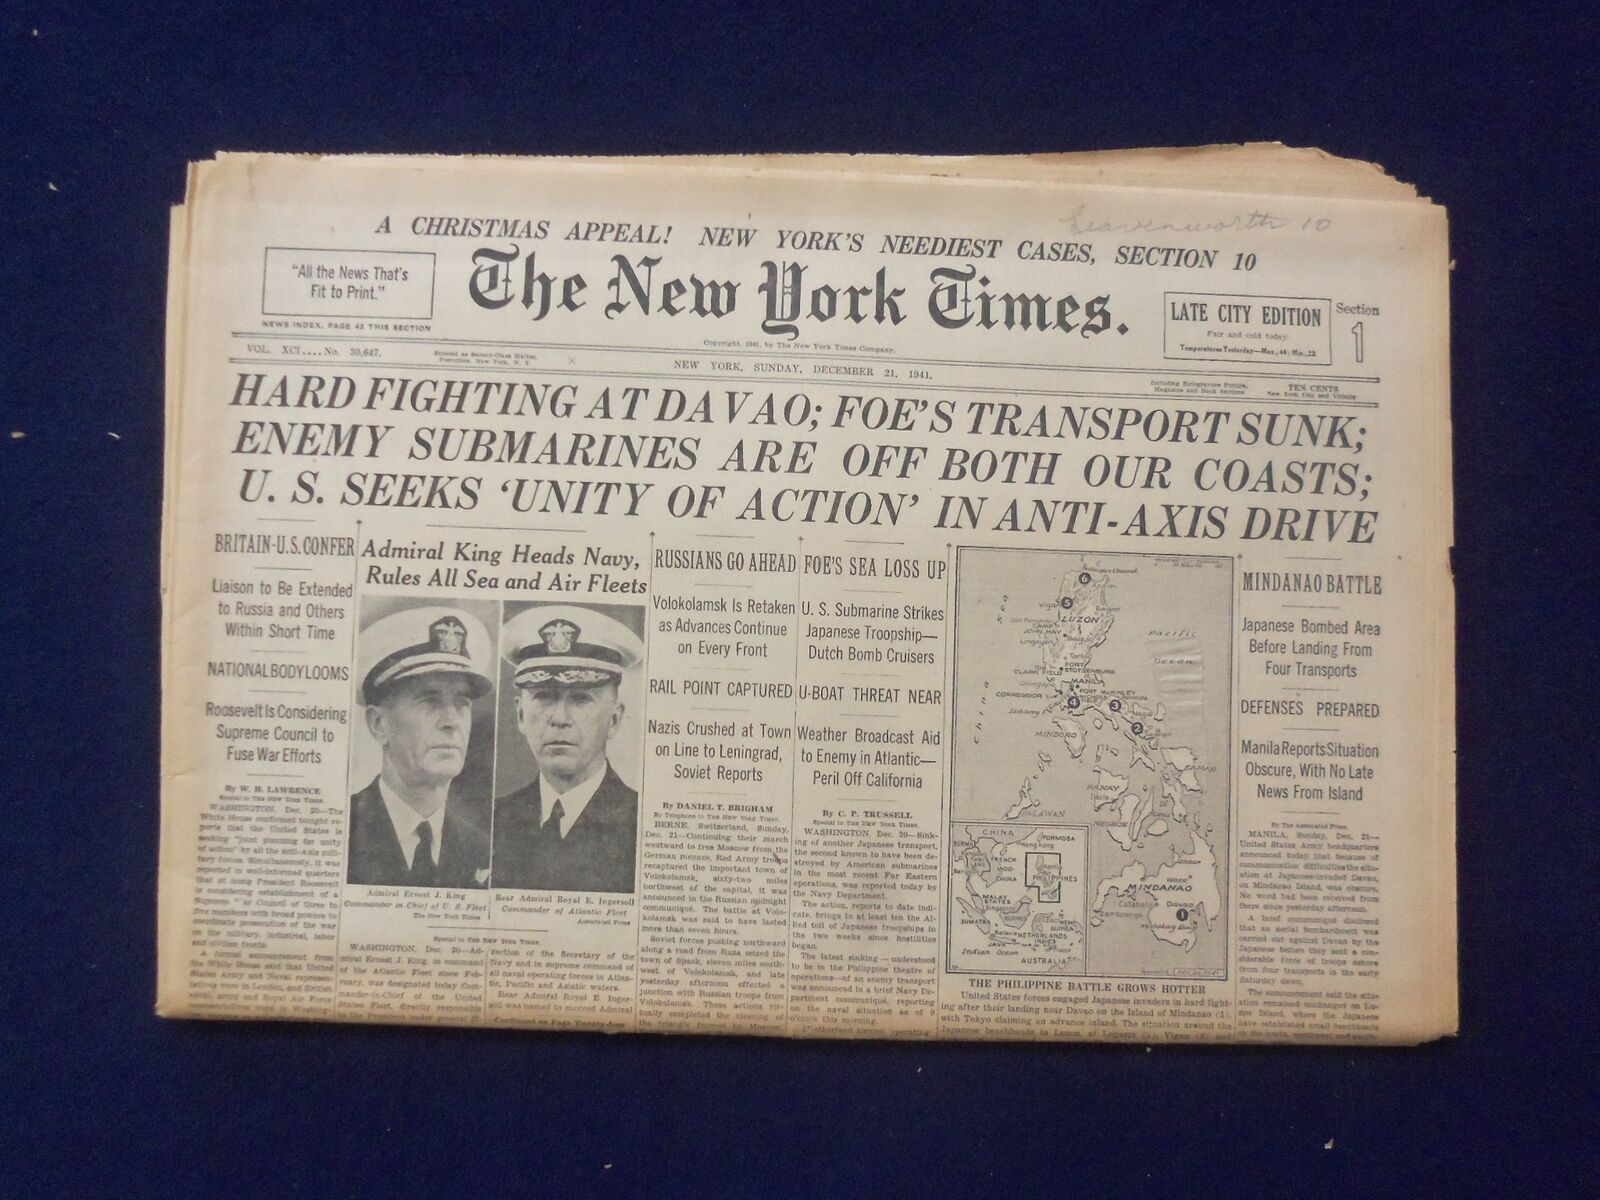 1941 DEC 21 NEW YORK TIMES - FIGHTING AT DAVAO, FOE'S TRANSPORT SUNK - NP 6486